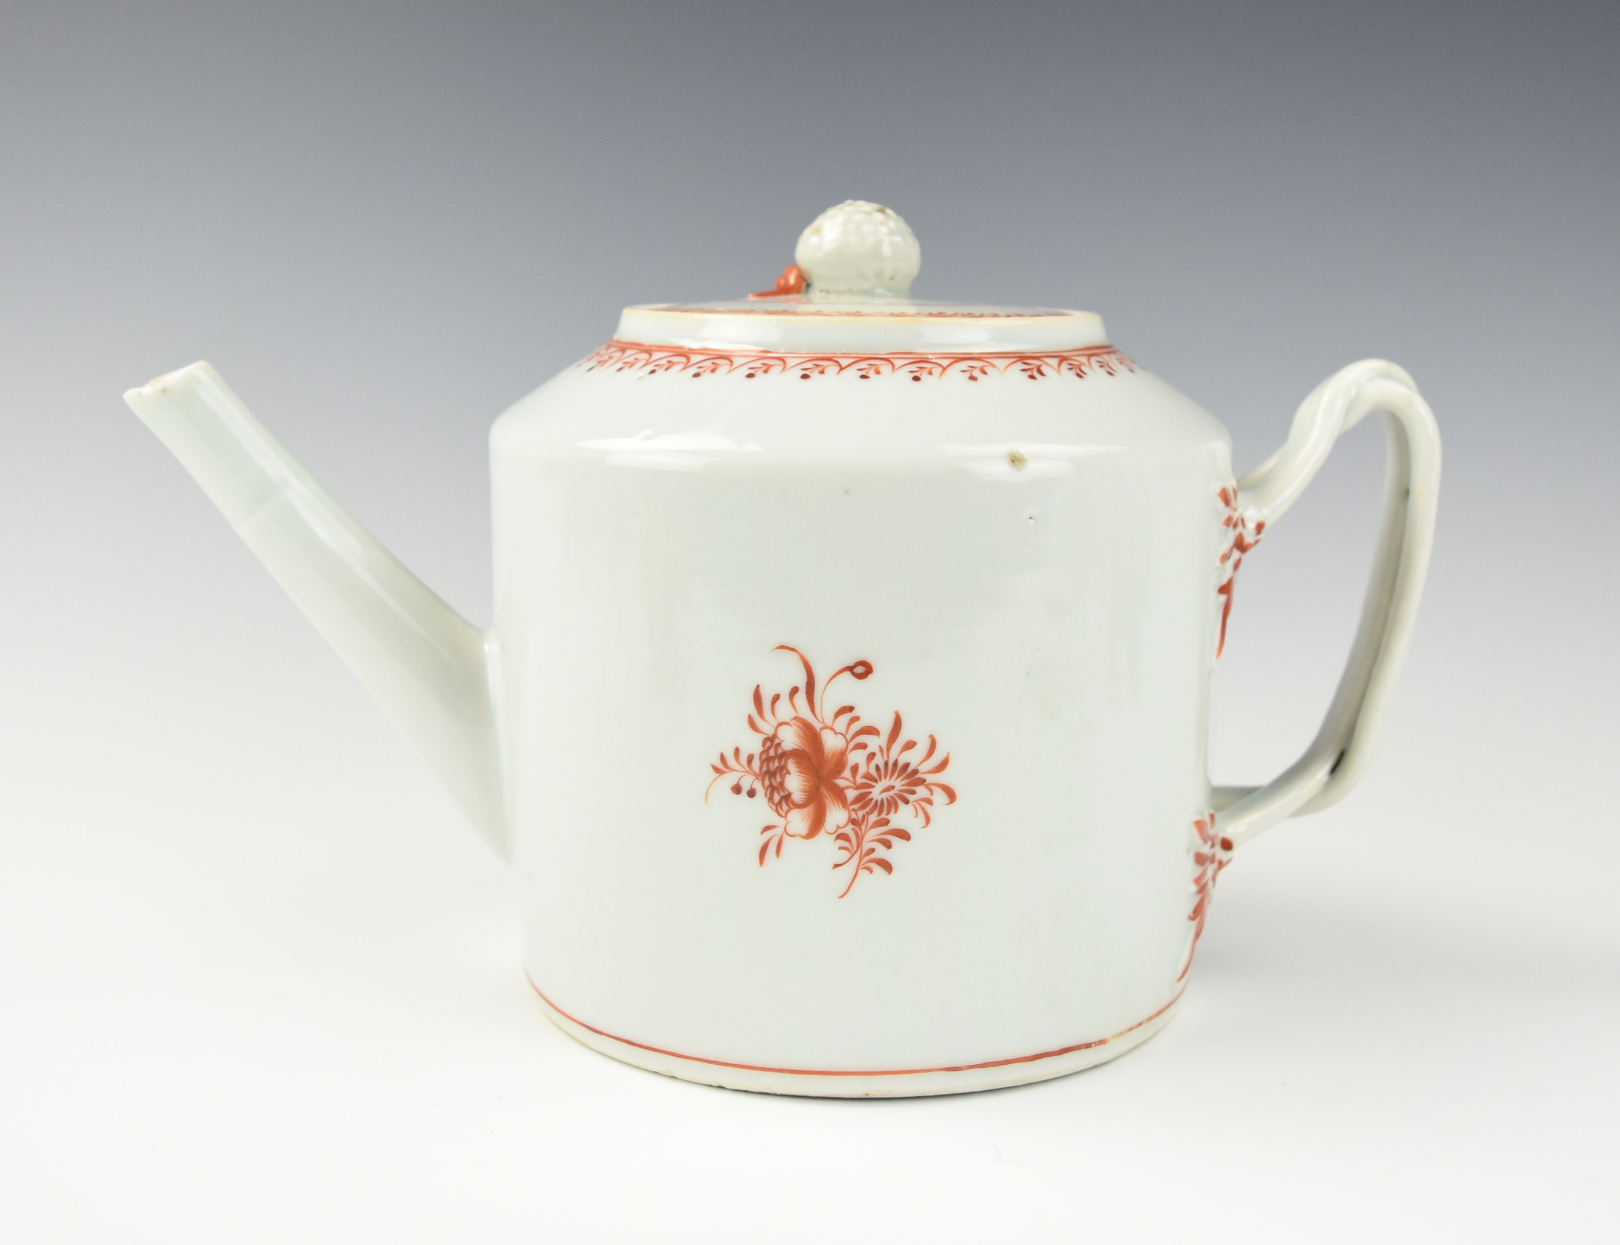 CHINESE EXPORT IRON RED TEAPOT 2cefb9